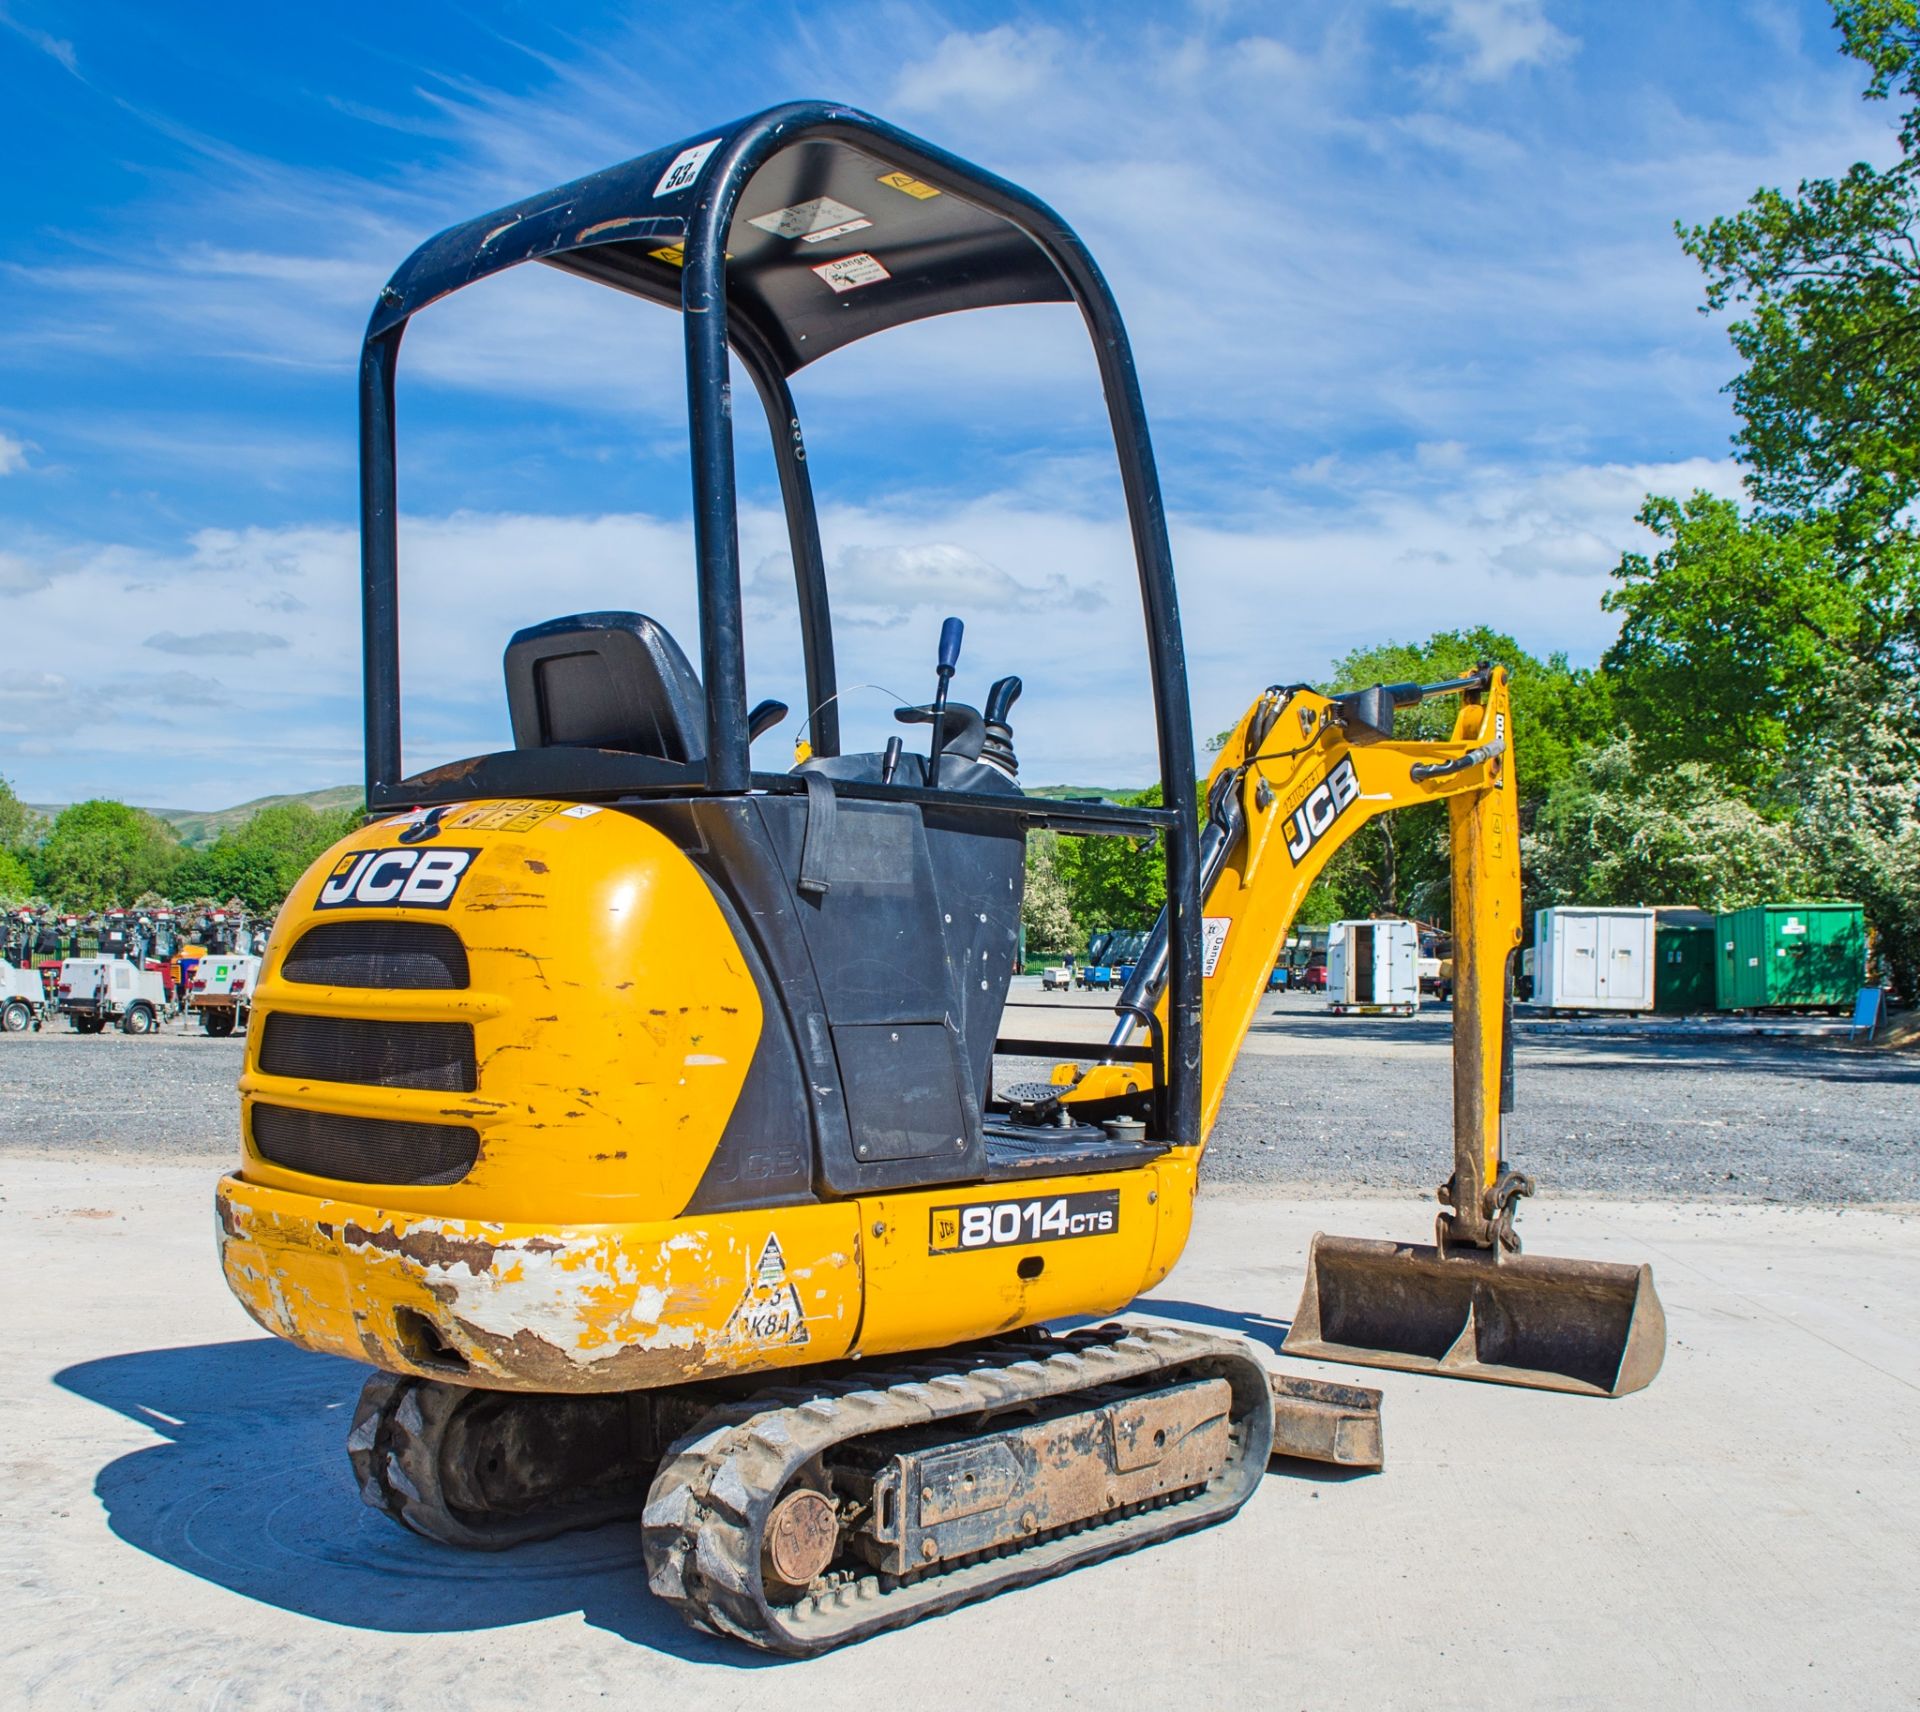 JCB 8014 CTS 1.5 tonne rubber tracked mini excavator Year: 2014 S/N: 2070389 Recorded Hours: 1616 - Image 4 of 18